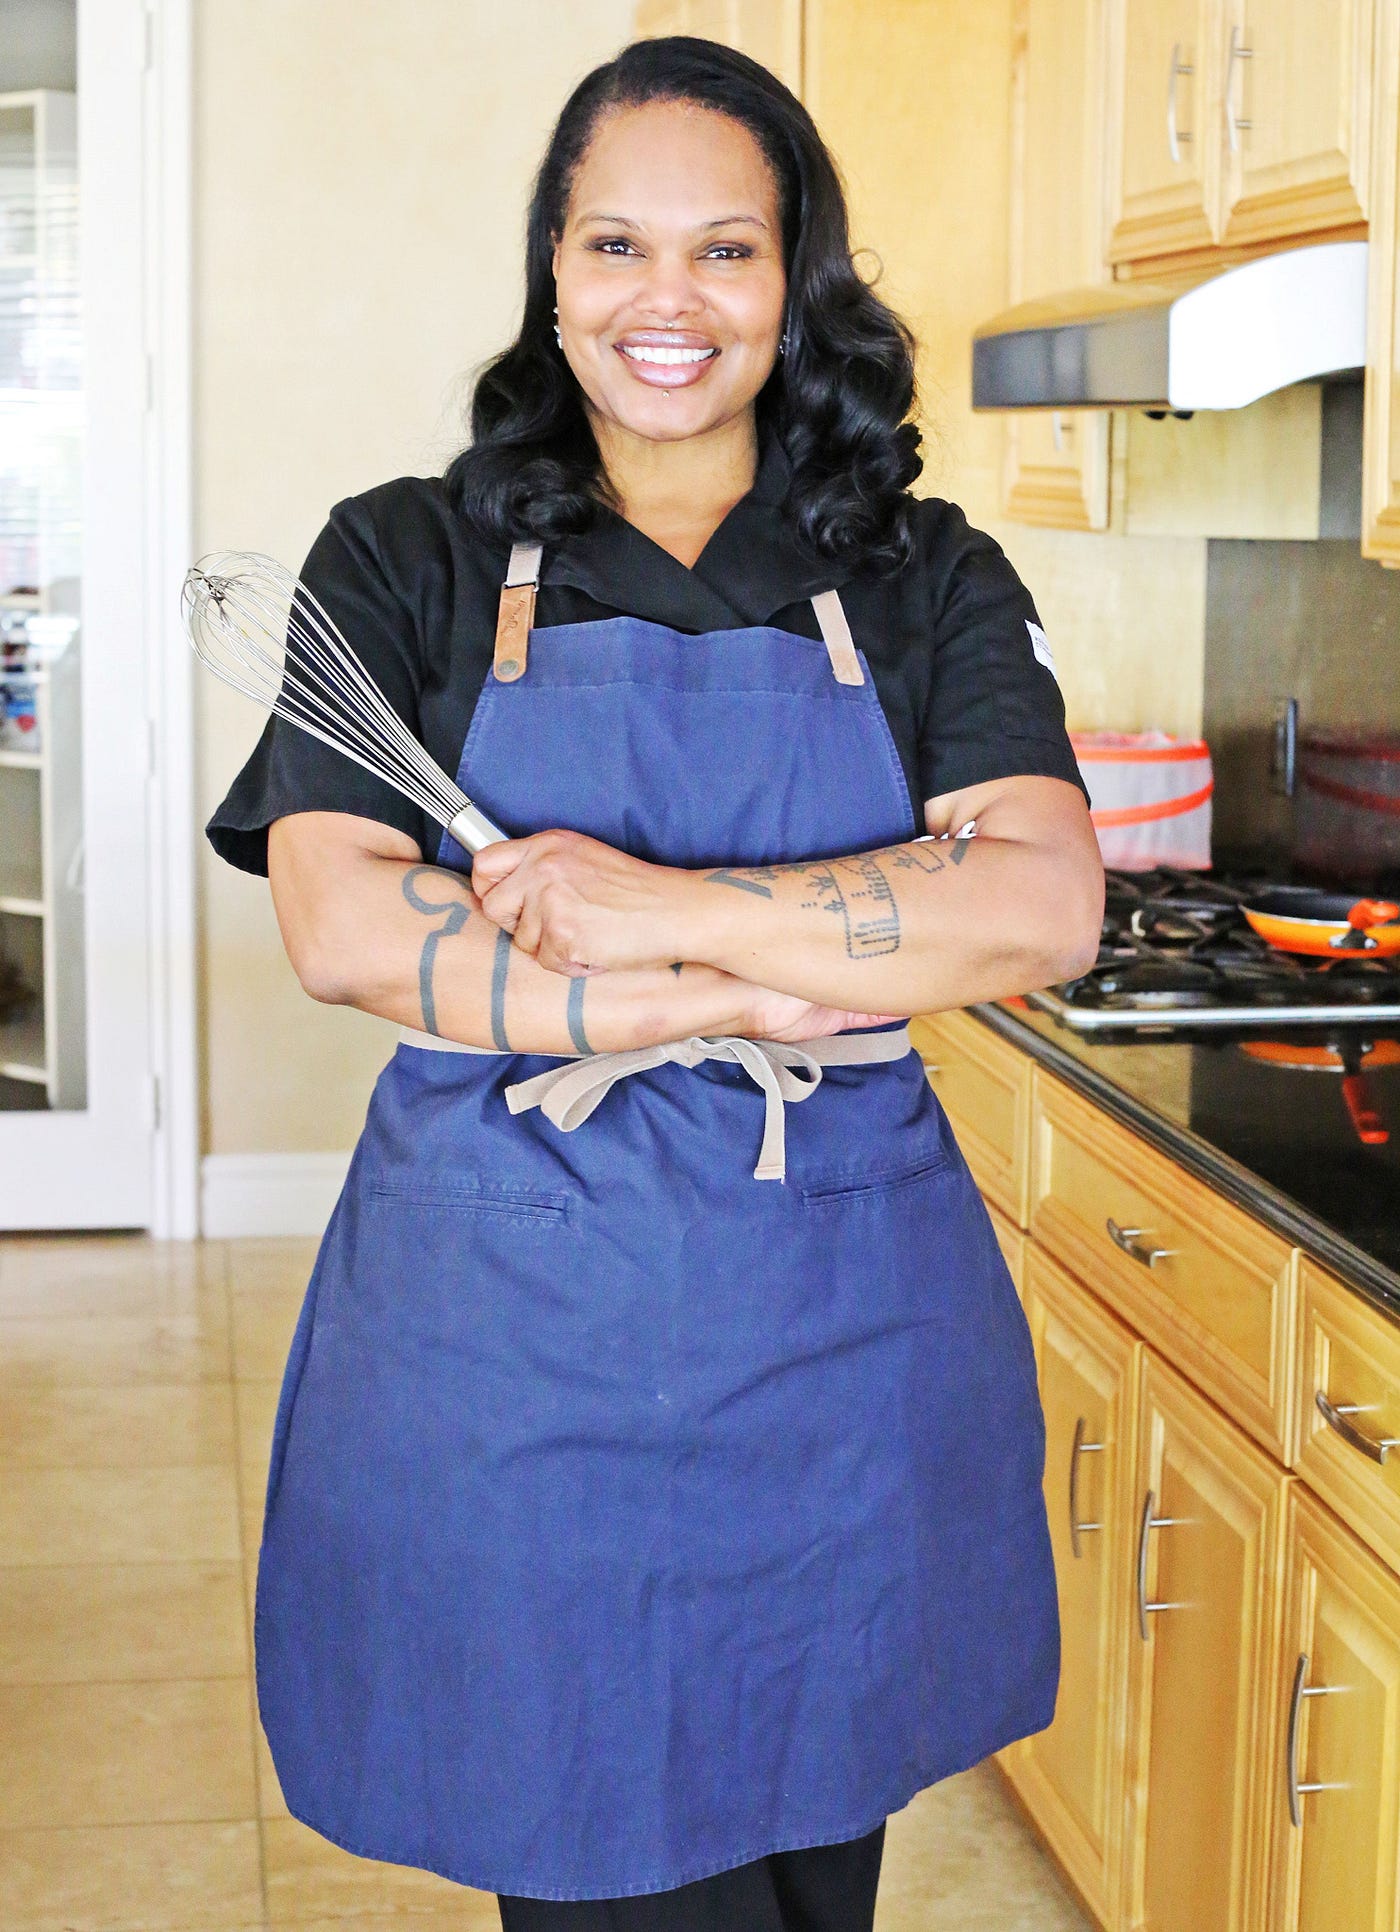 Female Founders: Chef Tamearra Dyson of Souley Vegan On The Five Things You  Need To Thrive and Succeed as a Woman Founder | by Authority Magazine |  Authority Magazine | Medium